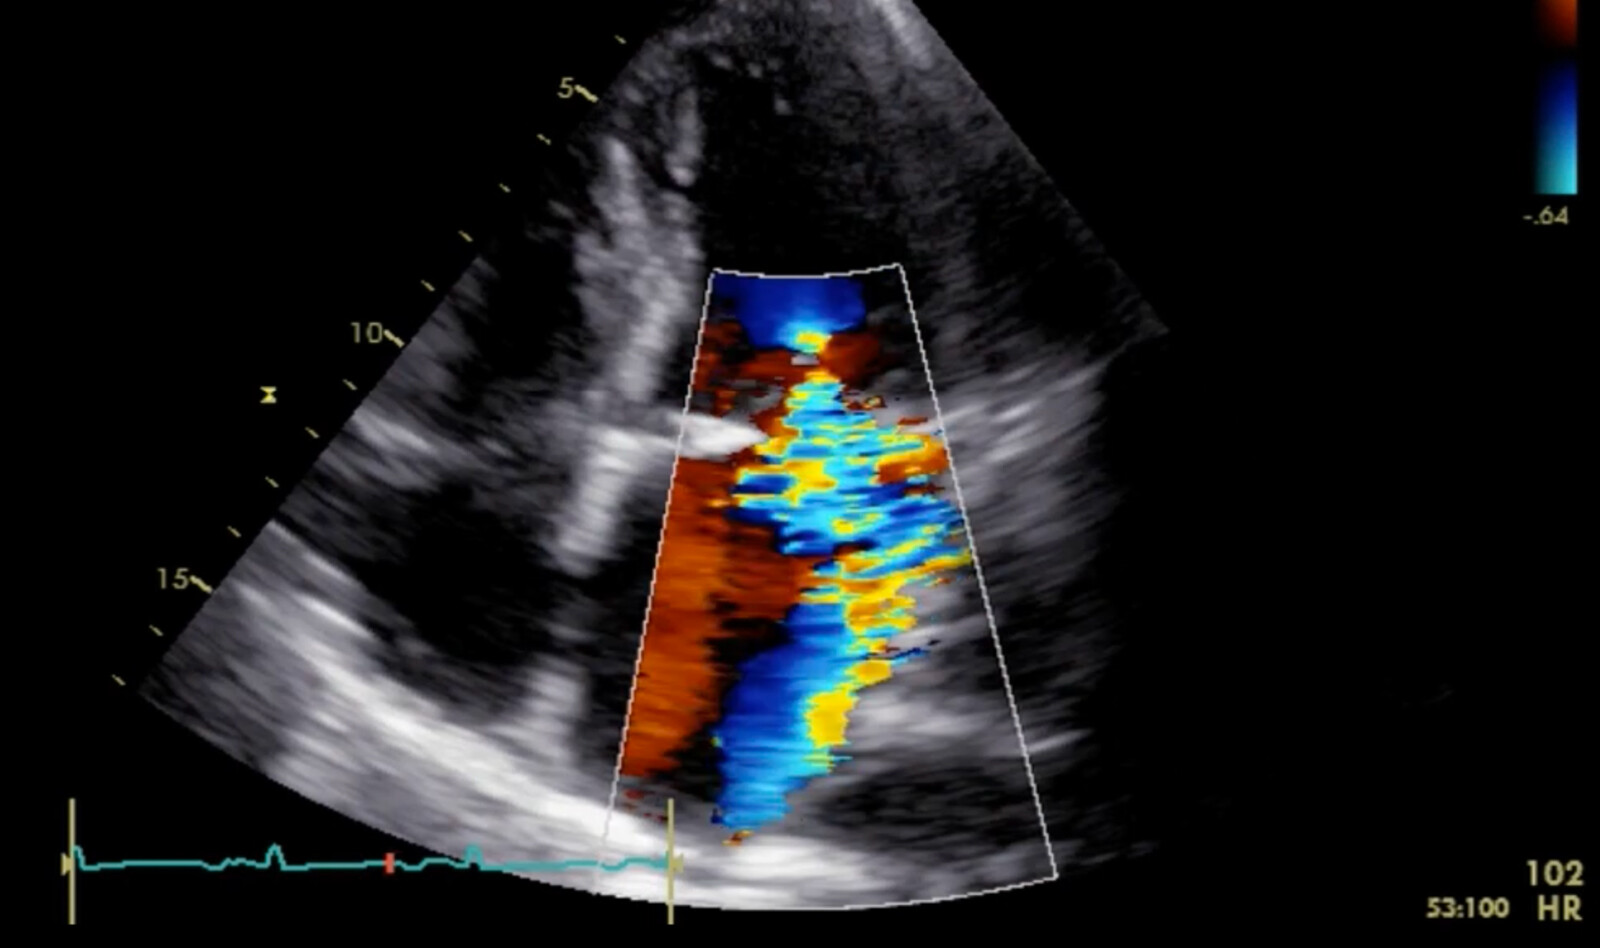 Image of point of care ultrasound point of care ultrasound point of care ultrasound point of care ultrasound point of care ultrasound point of care ultrasound gastric ultrasound cardiooncology    Online PoCUS Training